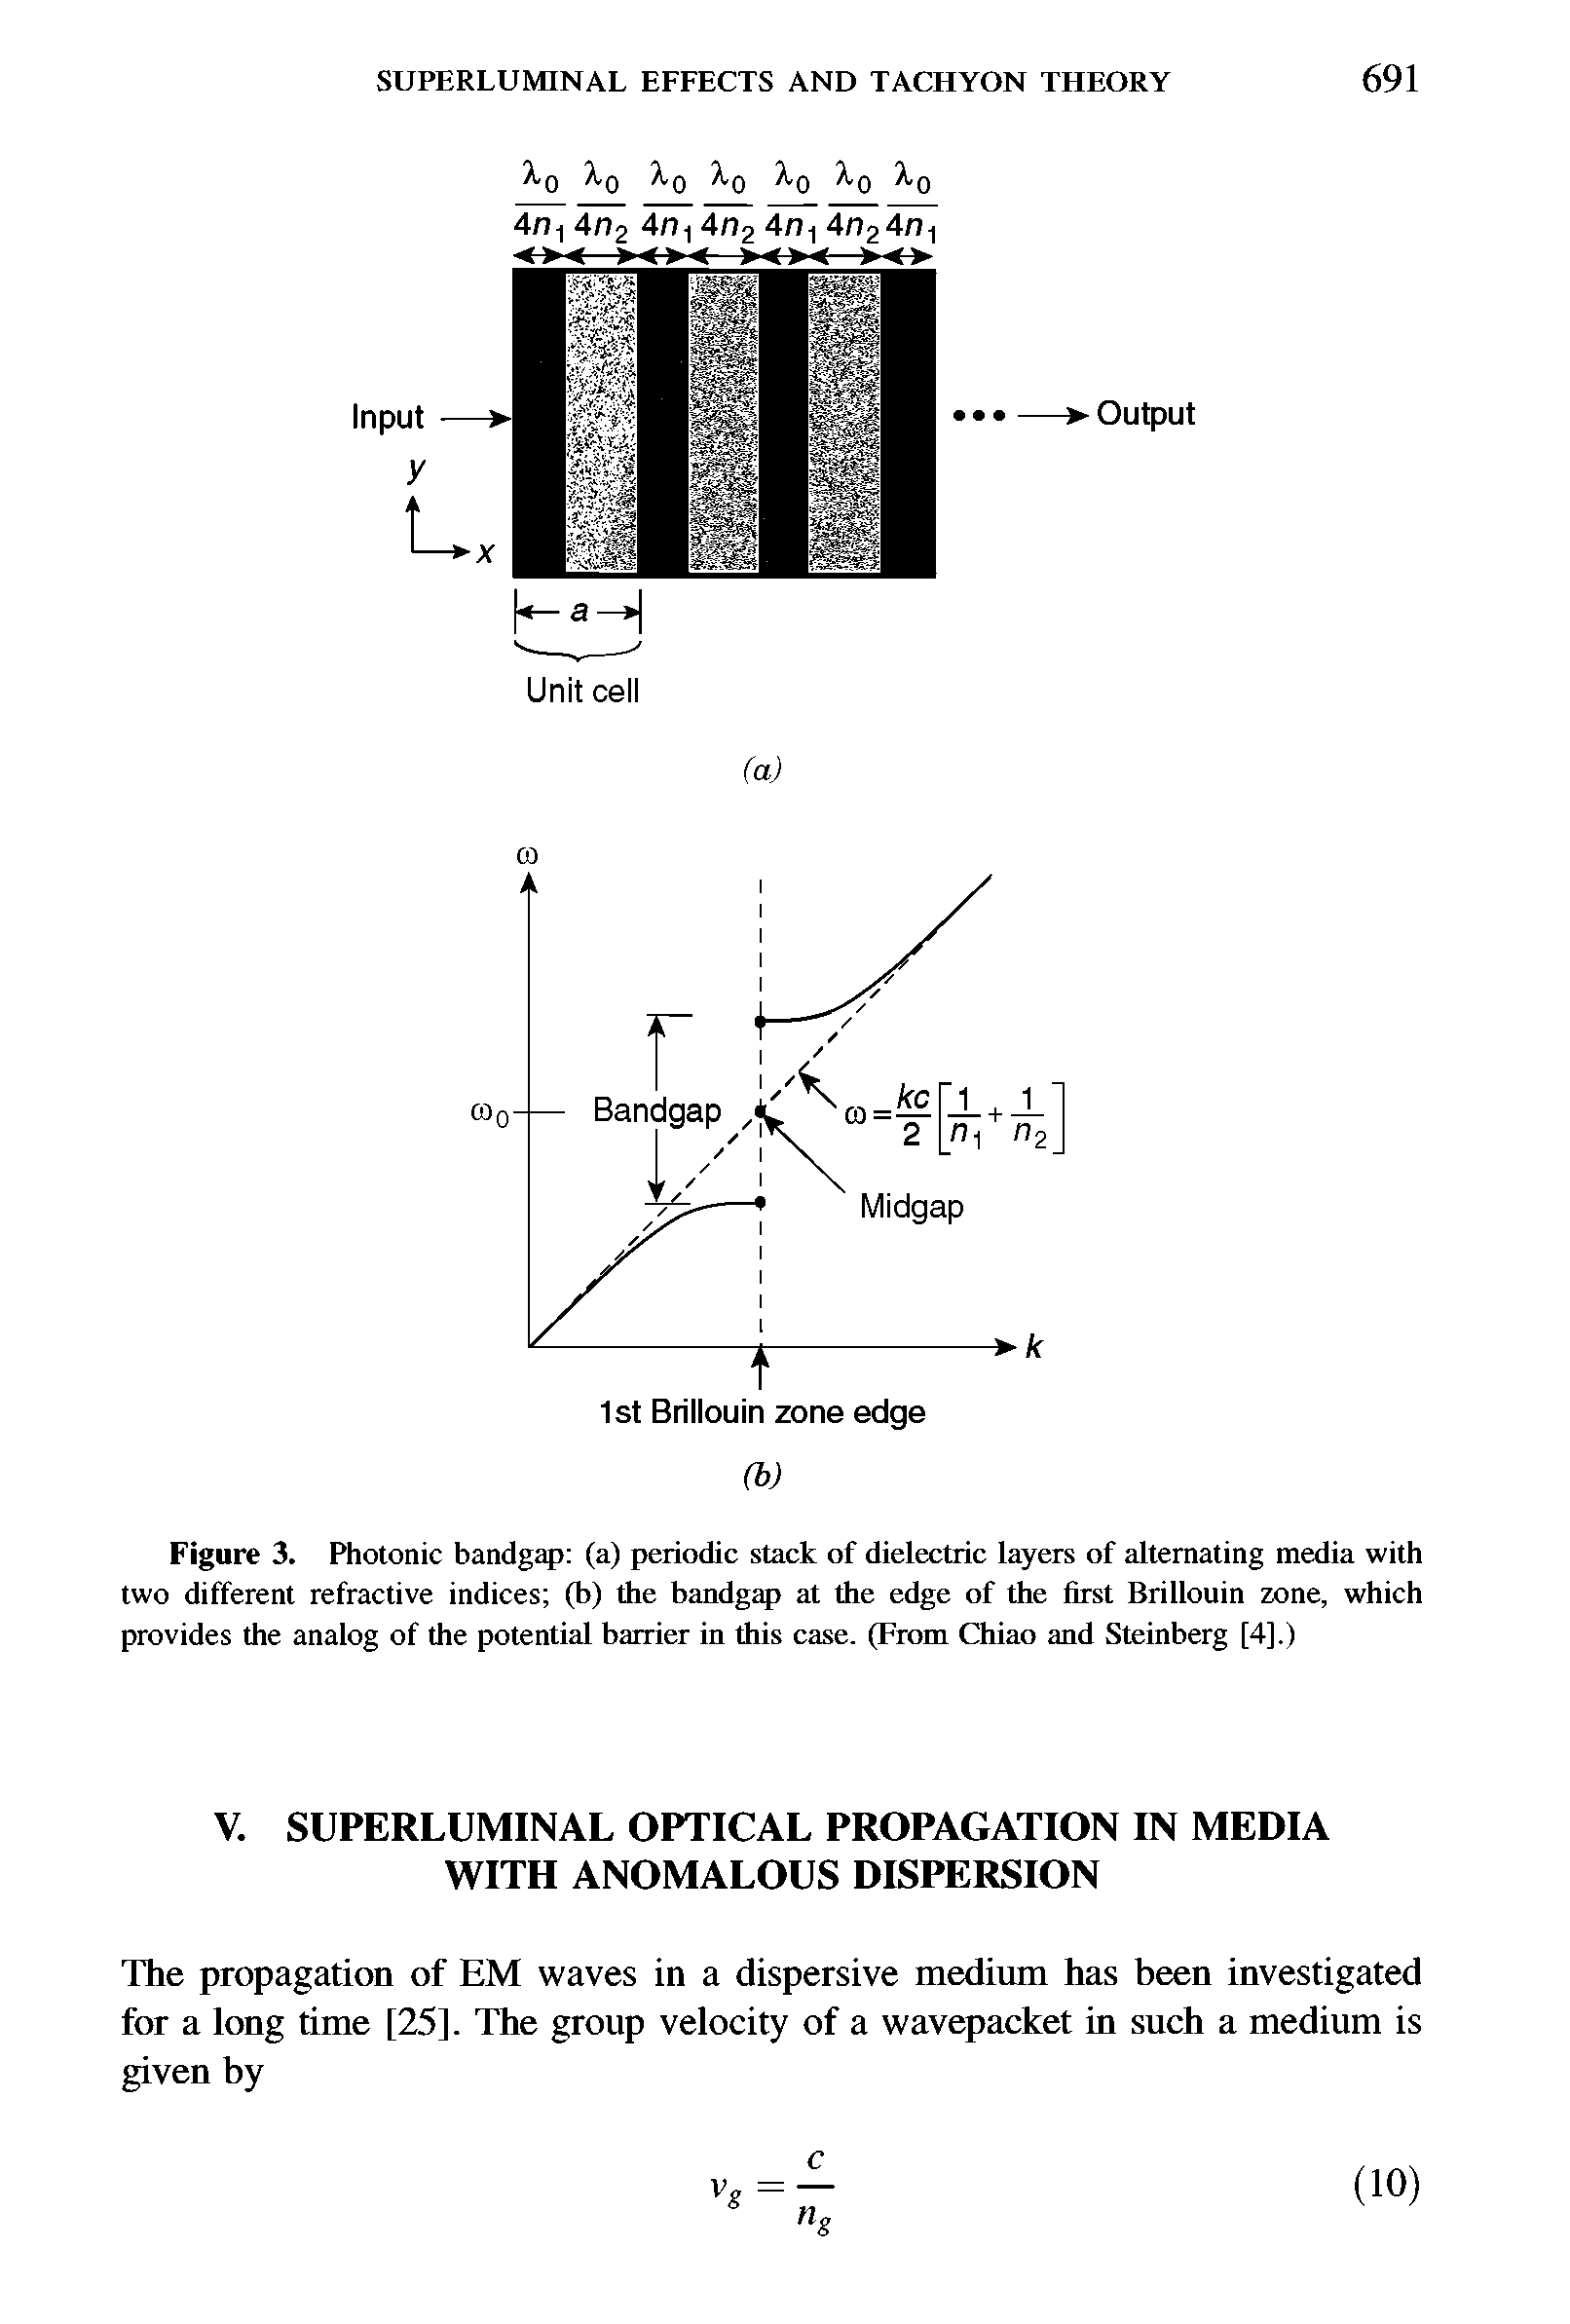 Figure 3. Photonic bandgap (a) periodic stack of dielectric layers of alternating media with two different refractive indices (b) the bandgap at the edge of the first Brillouin zone, which provides the analog of the potential barrier in this case. (From Chiao and Steinberg [4].)...